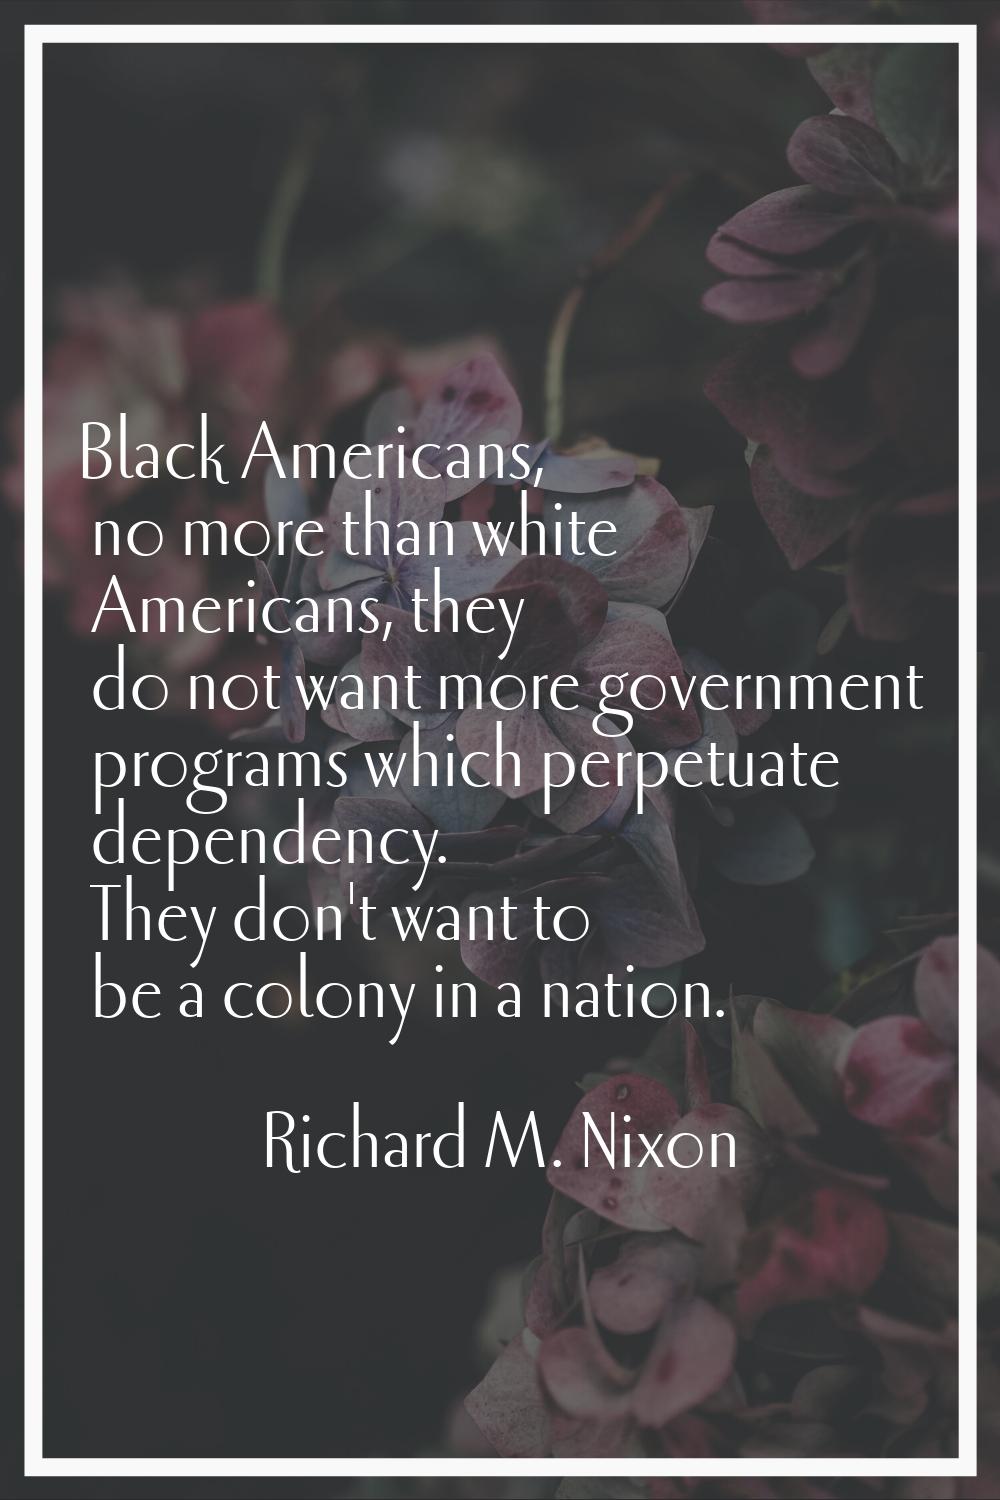 Black Americans, no more than white Americans, they do not want more government programs which perp